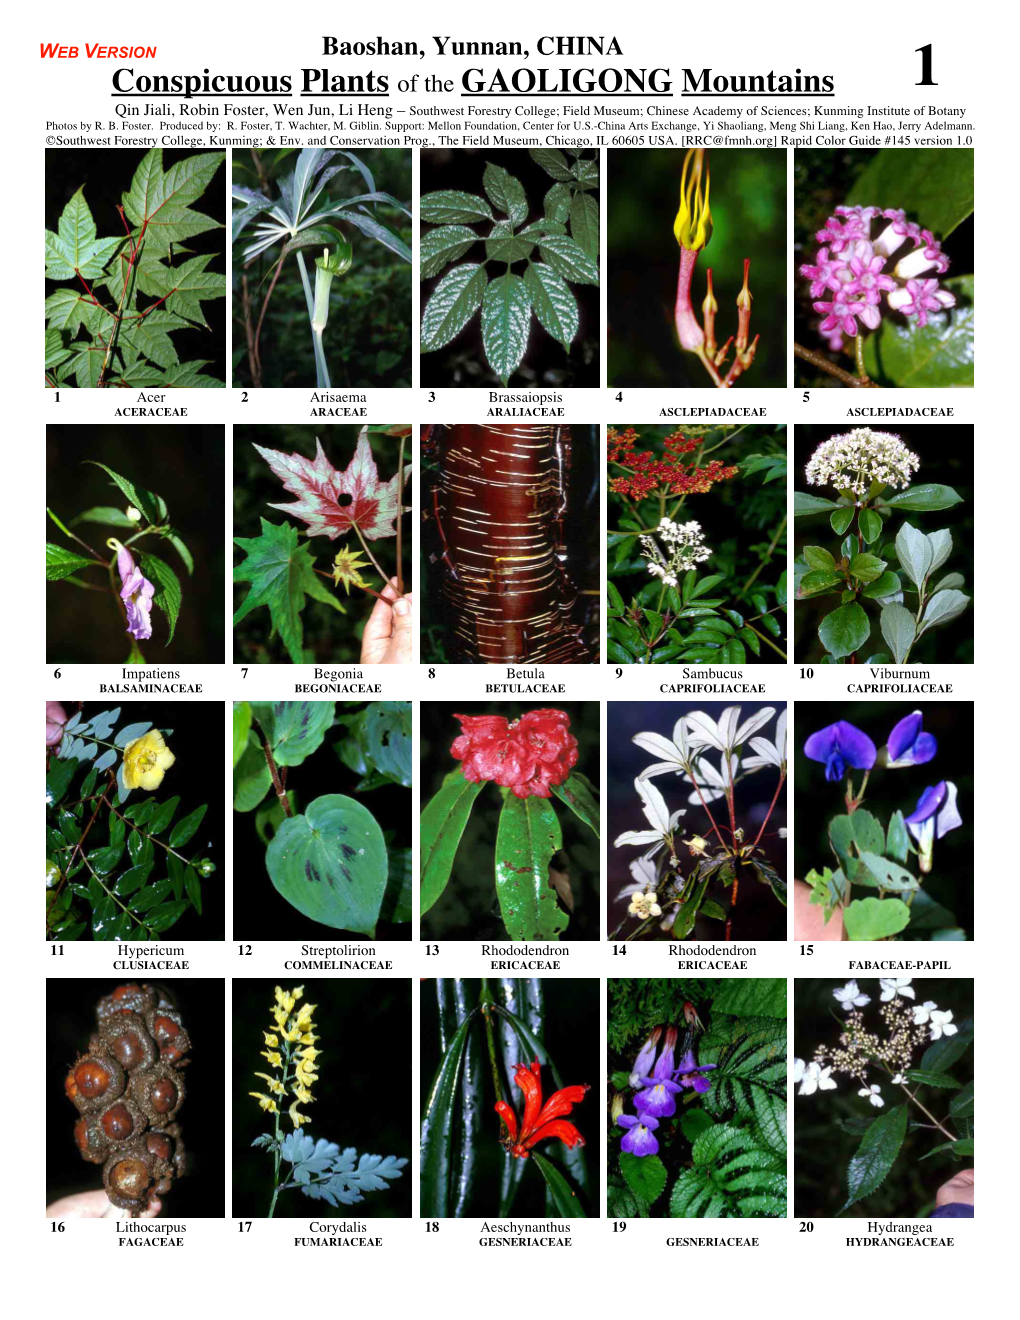 Conspicuous Plants of the GAOLIGONG Mountains